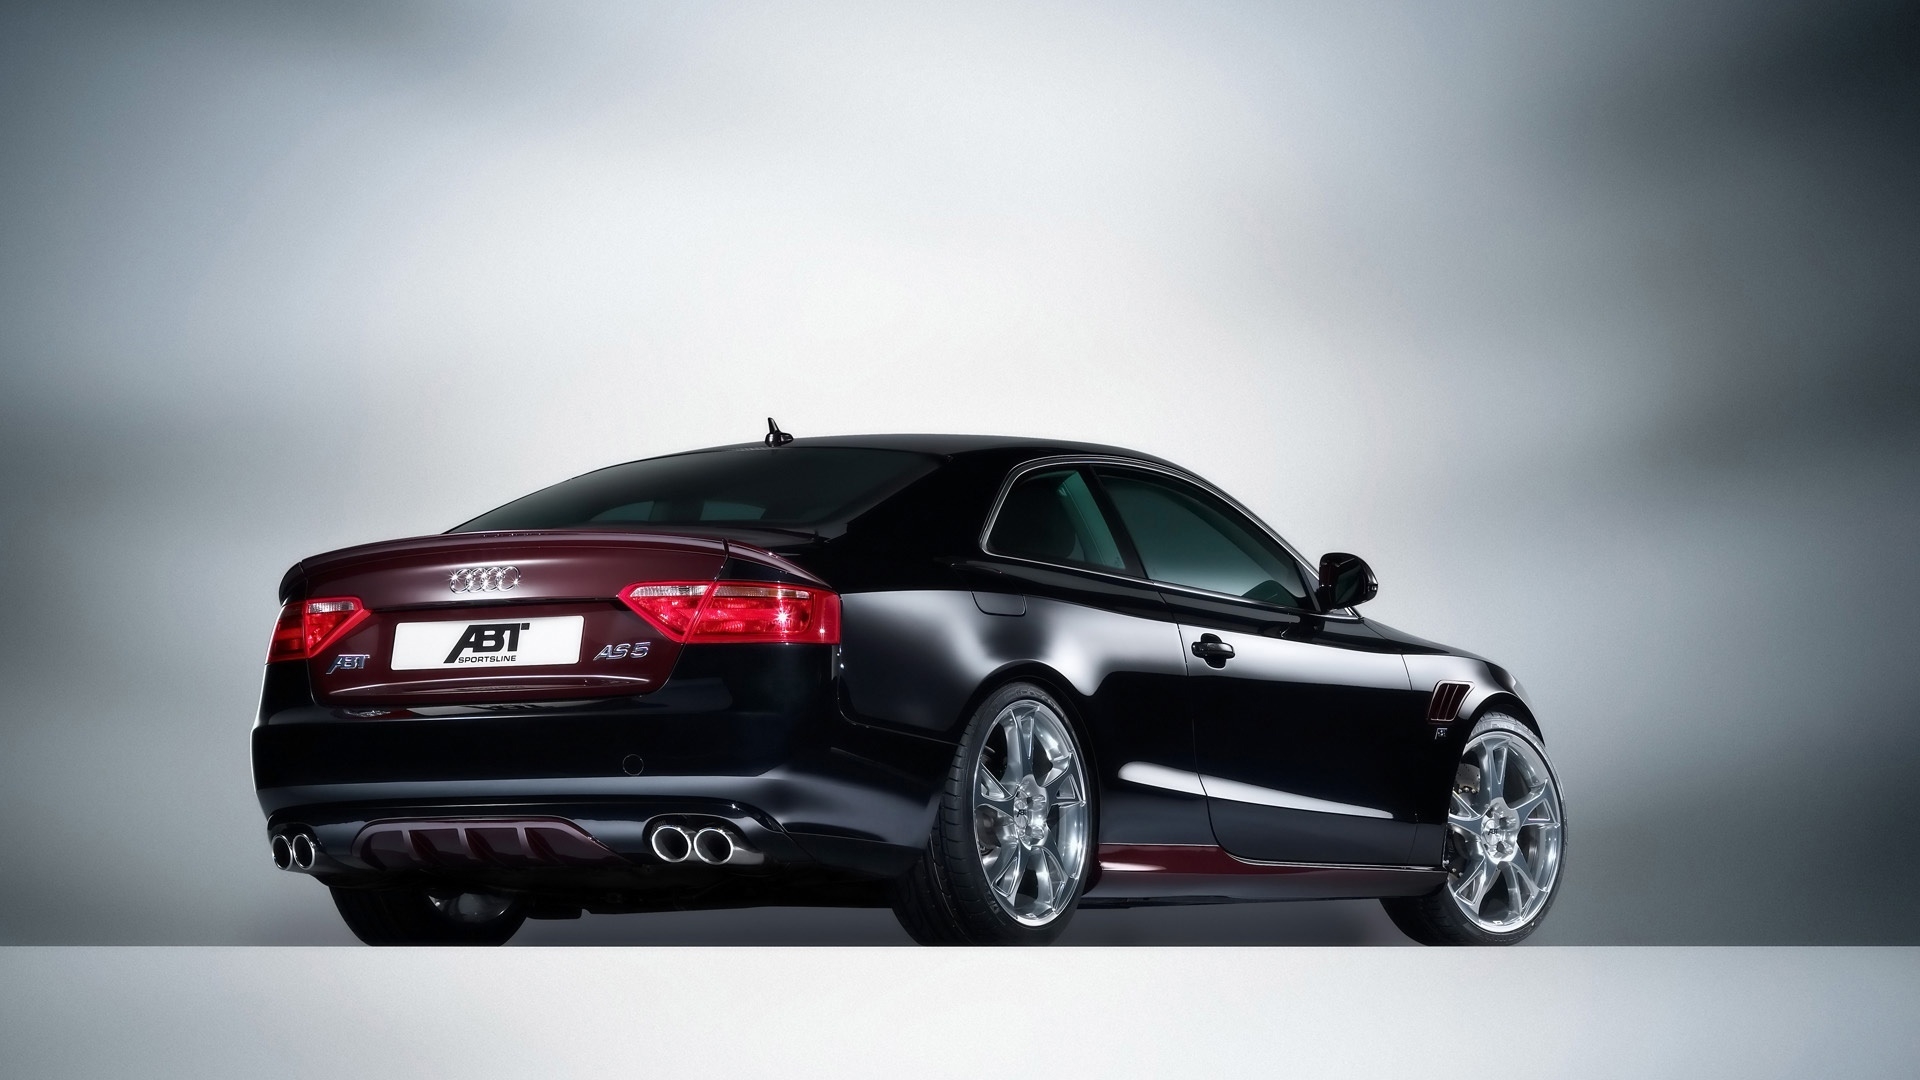 2008 Abt Audi AS5 - Rear Angle for 1920 x 1080 HDTV 1080p resolution